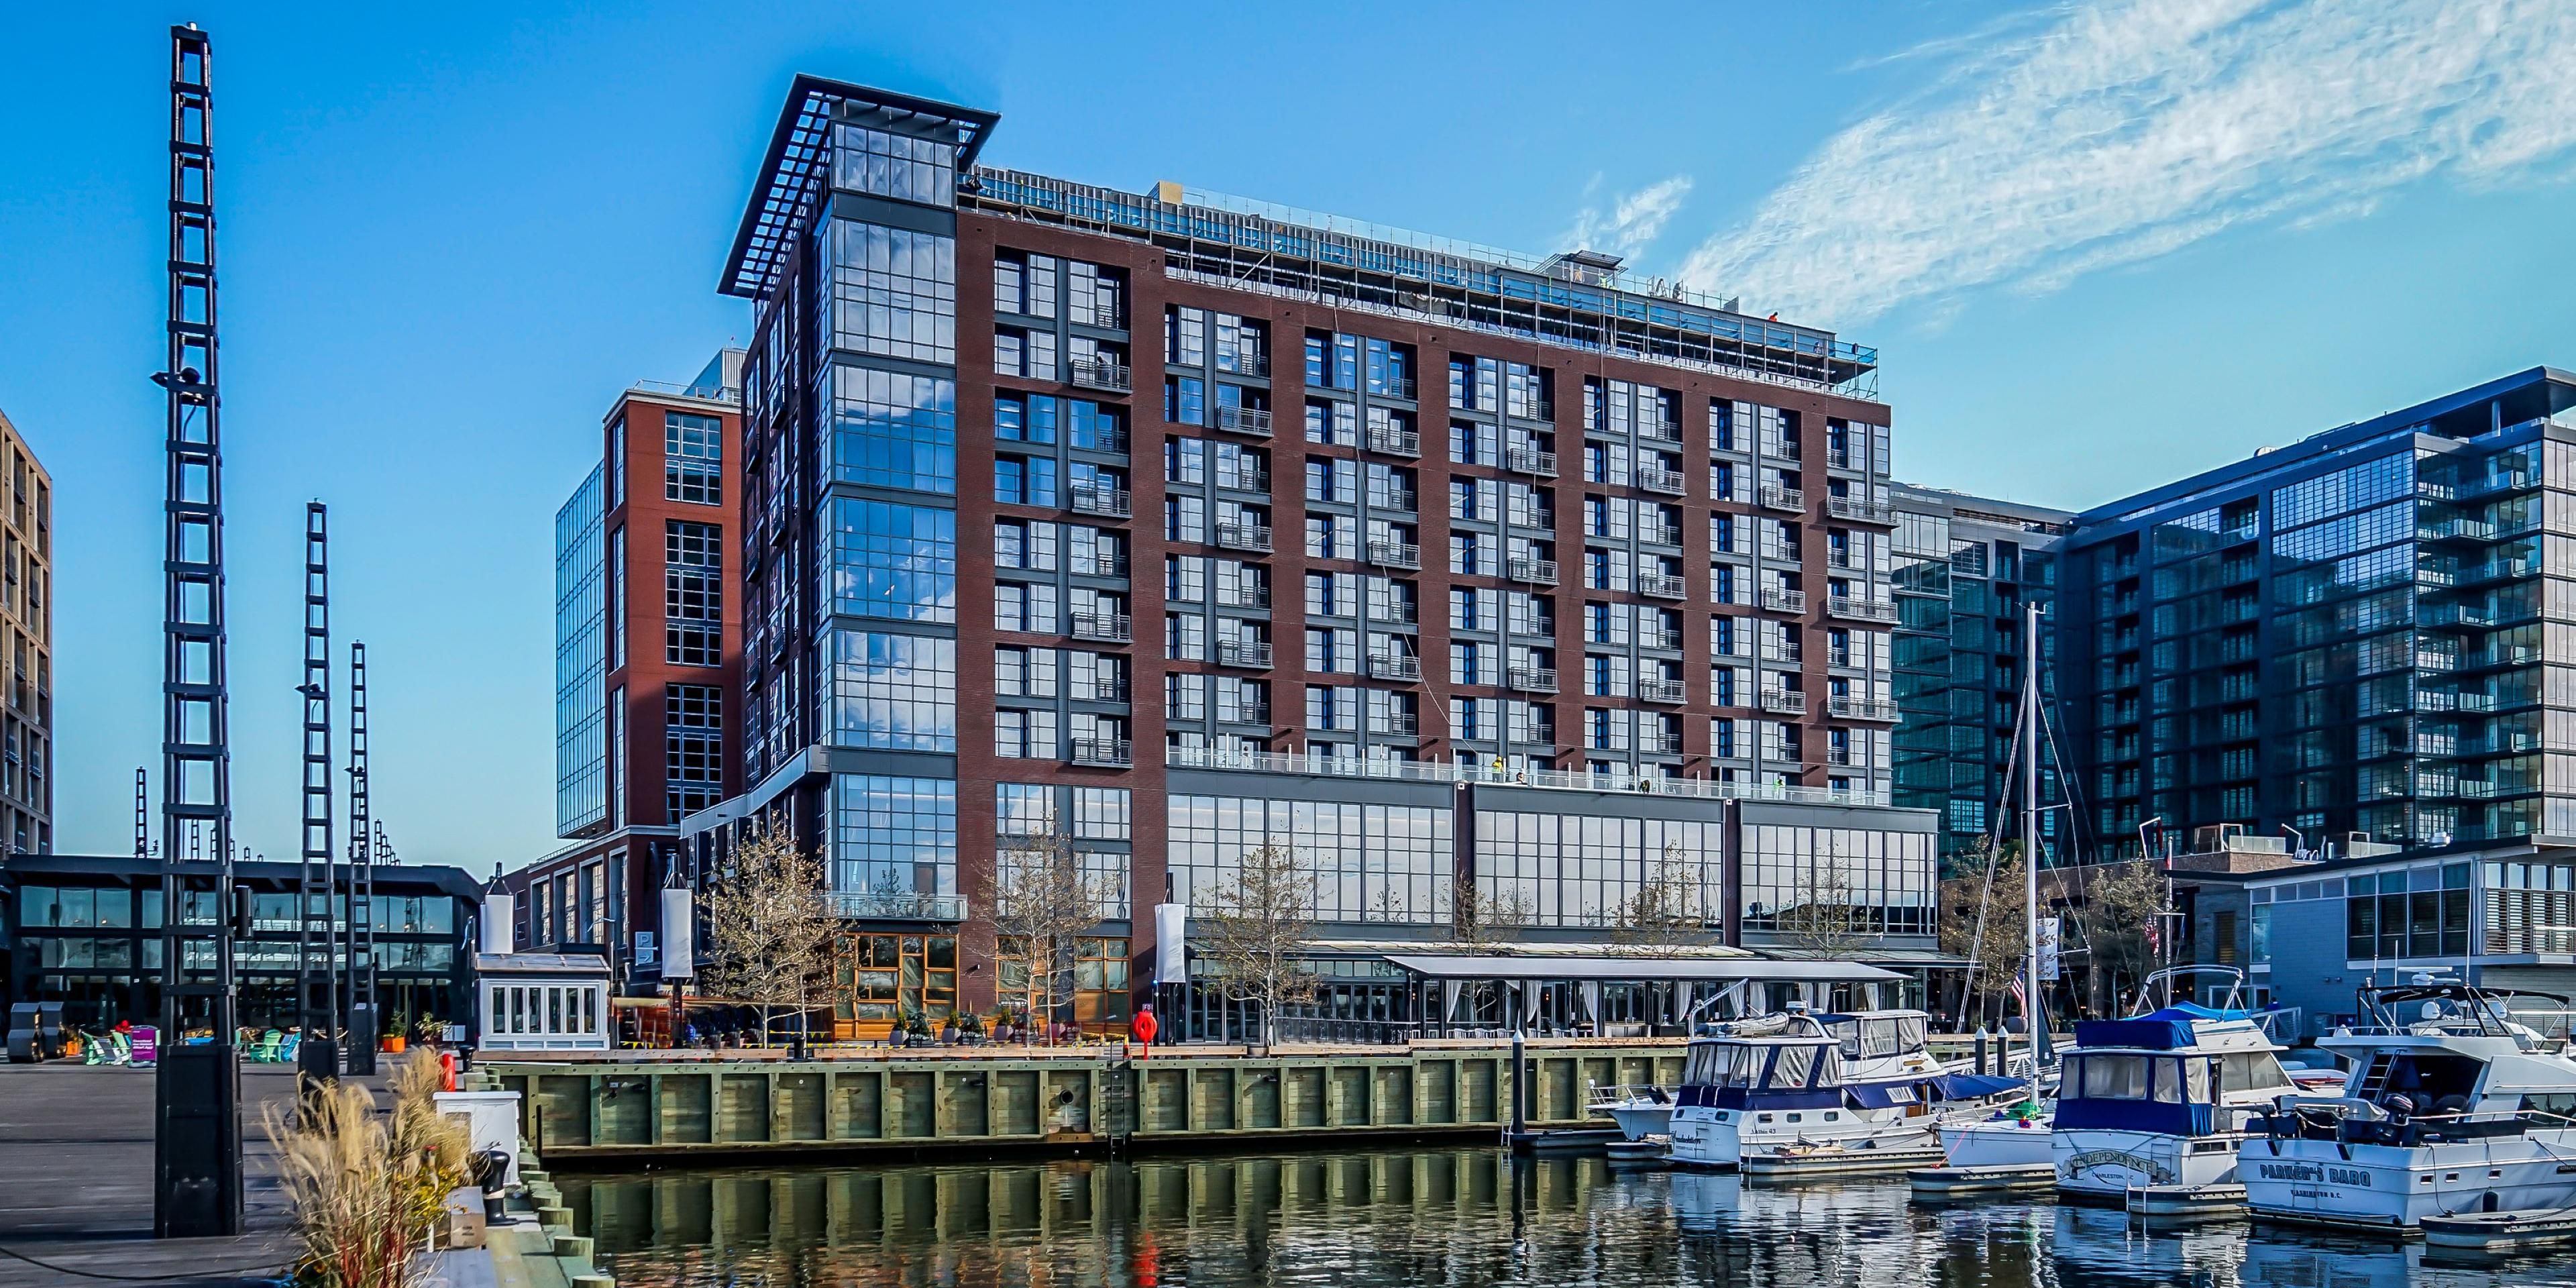 Our conveniently located hotel overlooks the Potomac River within The Wharf neighborhood — D.C.’s acclaimed waterfront entertainment and residential oasis. Standout features include a spa, outdoor pool, restaurants, and fitness center. We are also steps from major museums and historical monuments, and next door to the acclaimed music venue, Anthem.